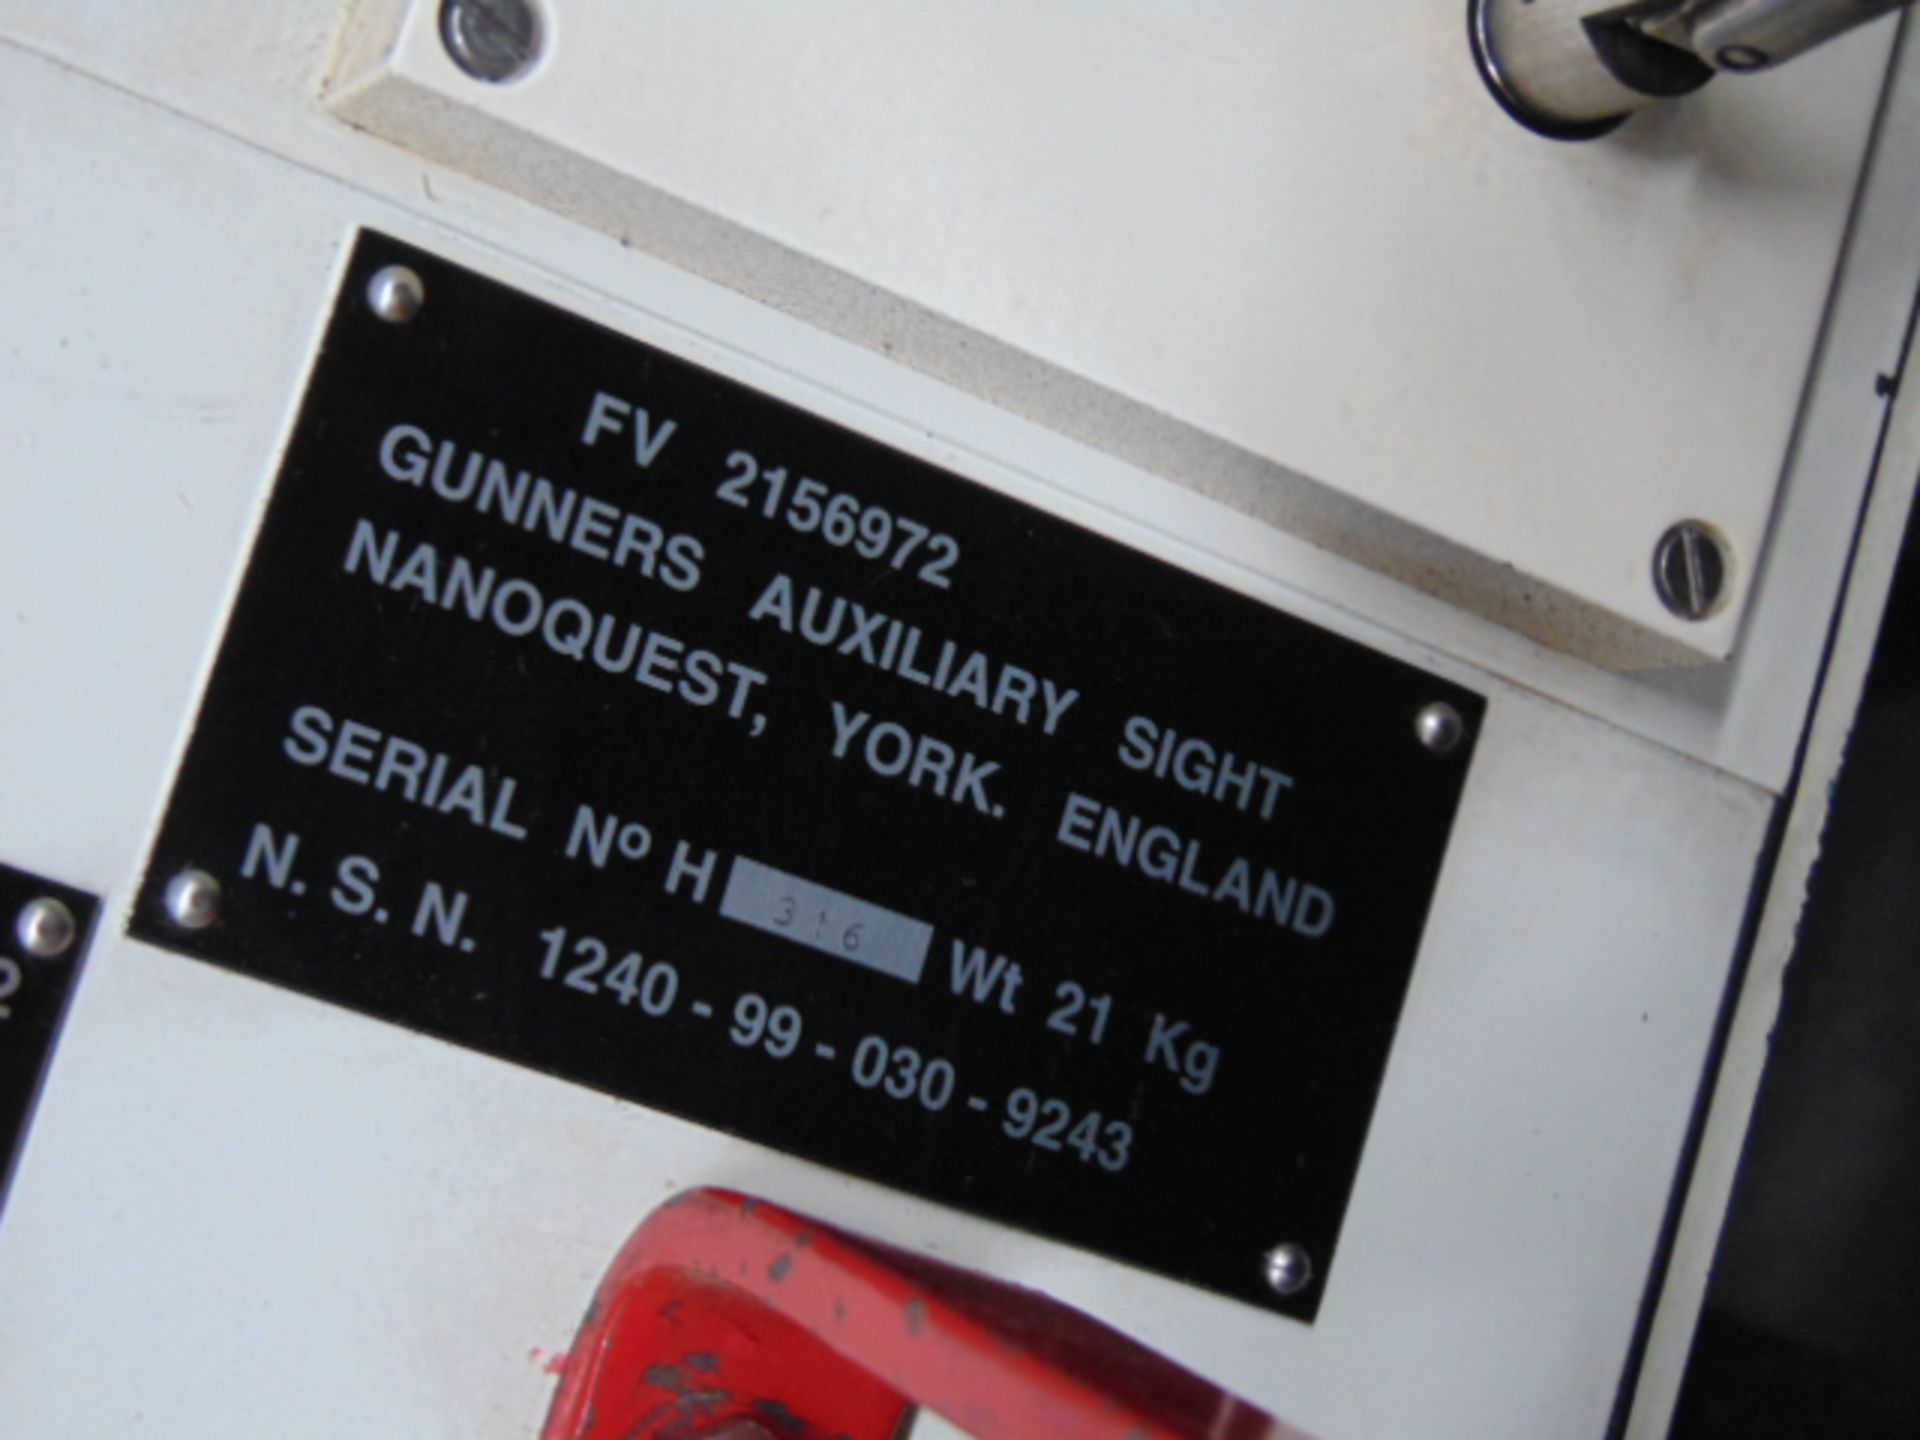 Ex Reserve FV2156972 Gunners Auxillary Sight C/W Transit Case - Image 5 of 11